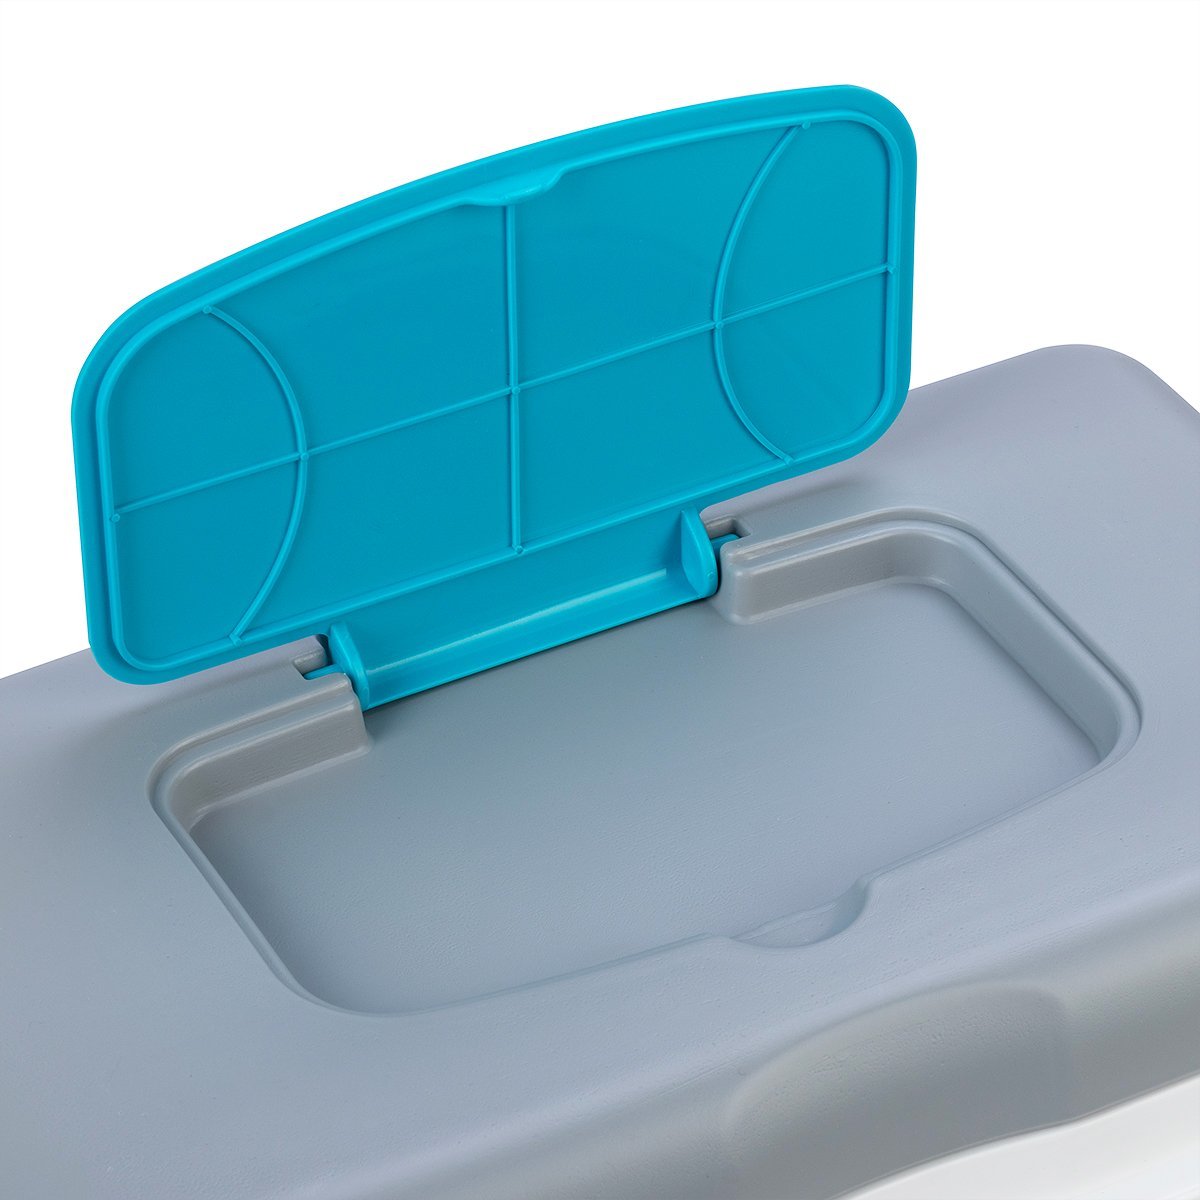 Primero Portable Camping Ice Chest with Lid Cup Holders, 26 qt is equipped woth an extra storage compartment in the lid